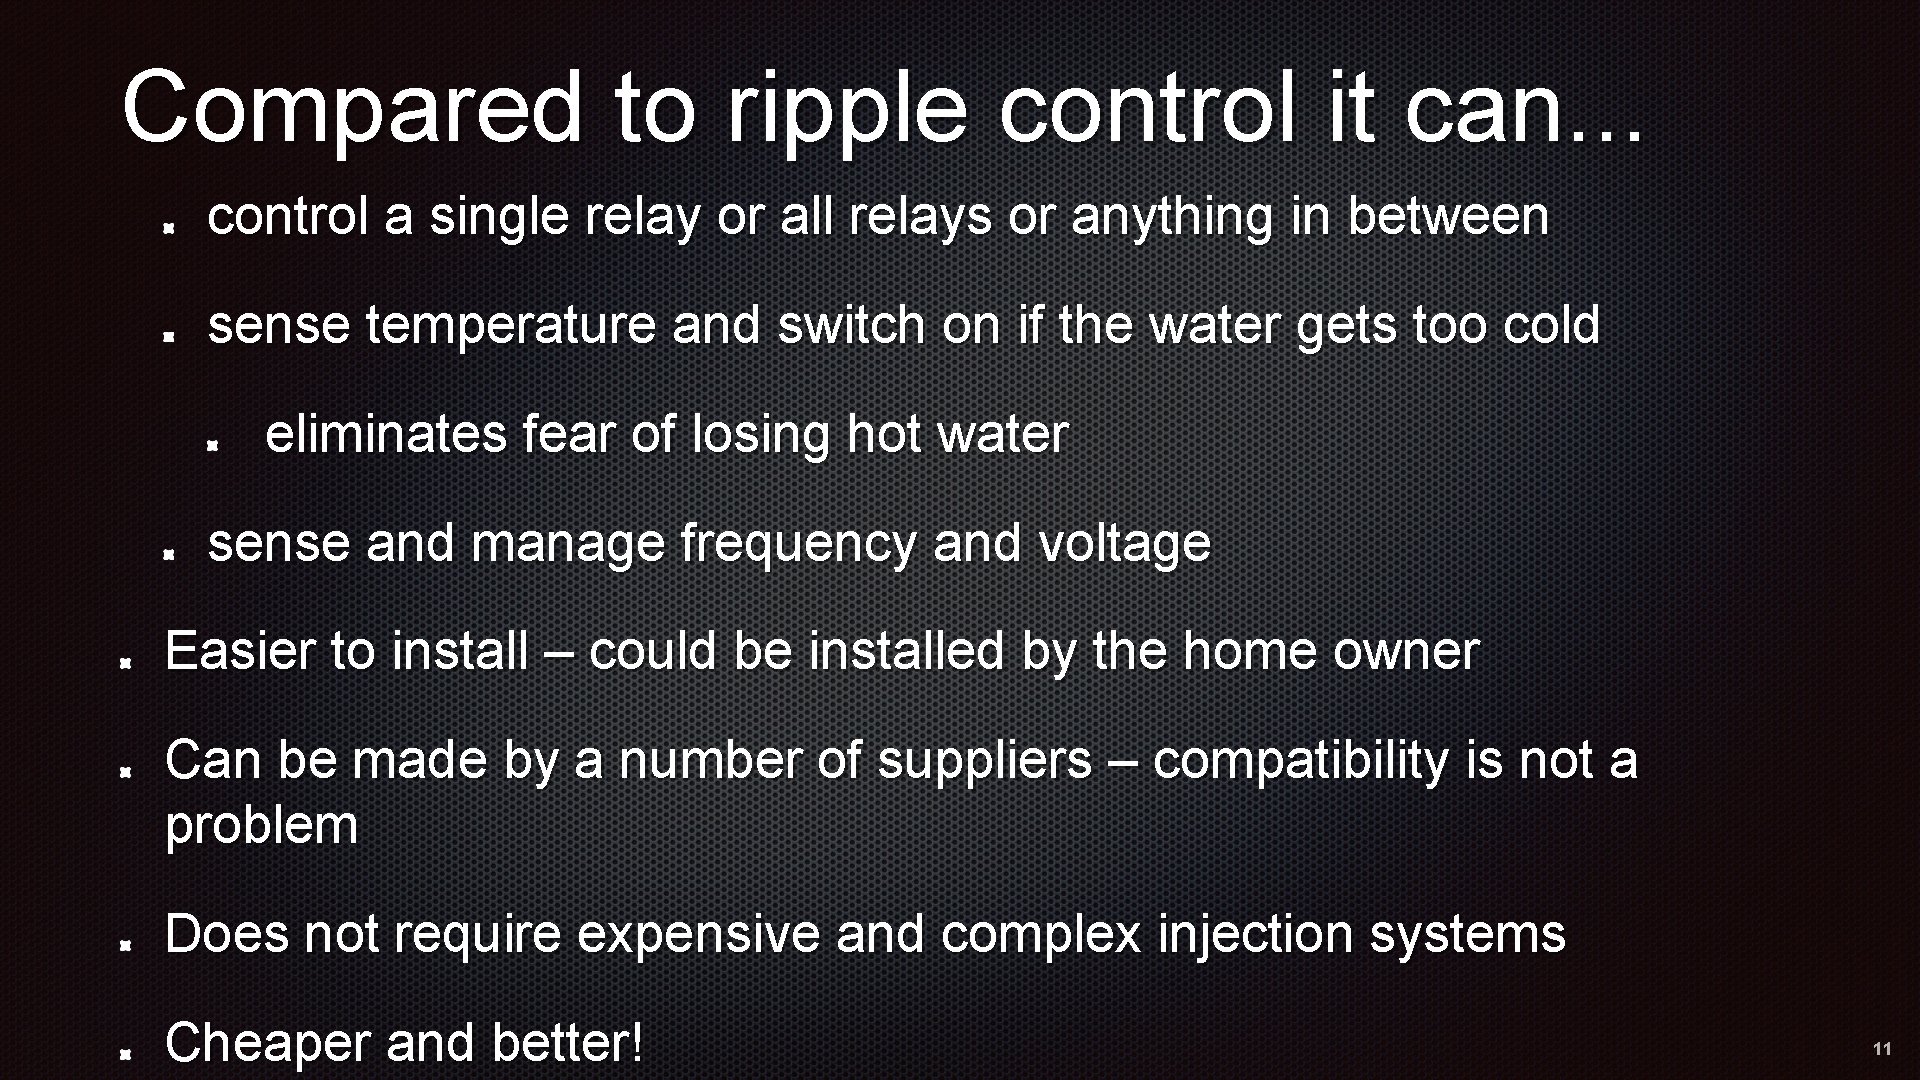 Compared to ripple control it can. . . control a single relay or all